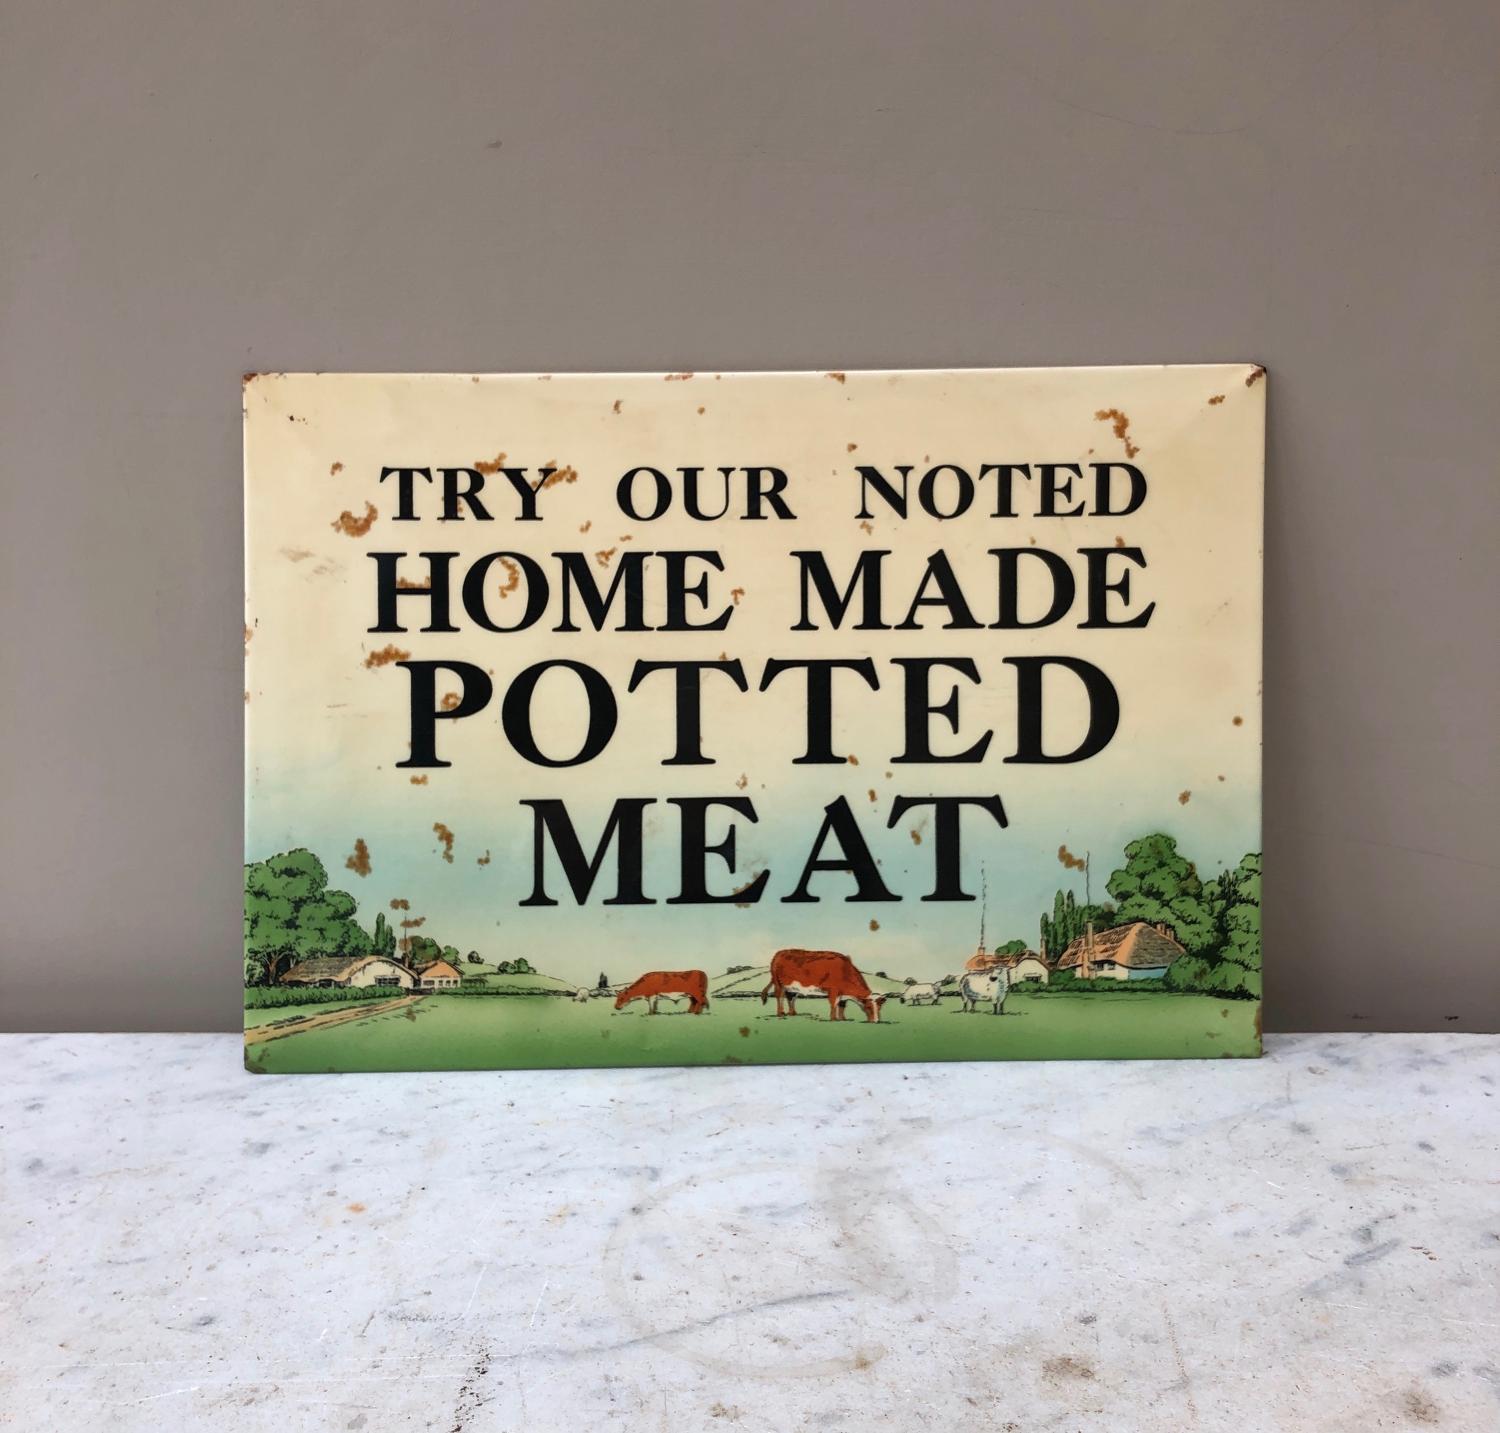 1940s Butchers Advertising Sign - Try Our Noted Home Made Potted Meat